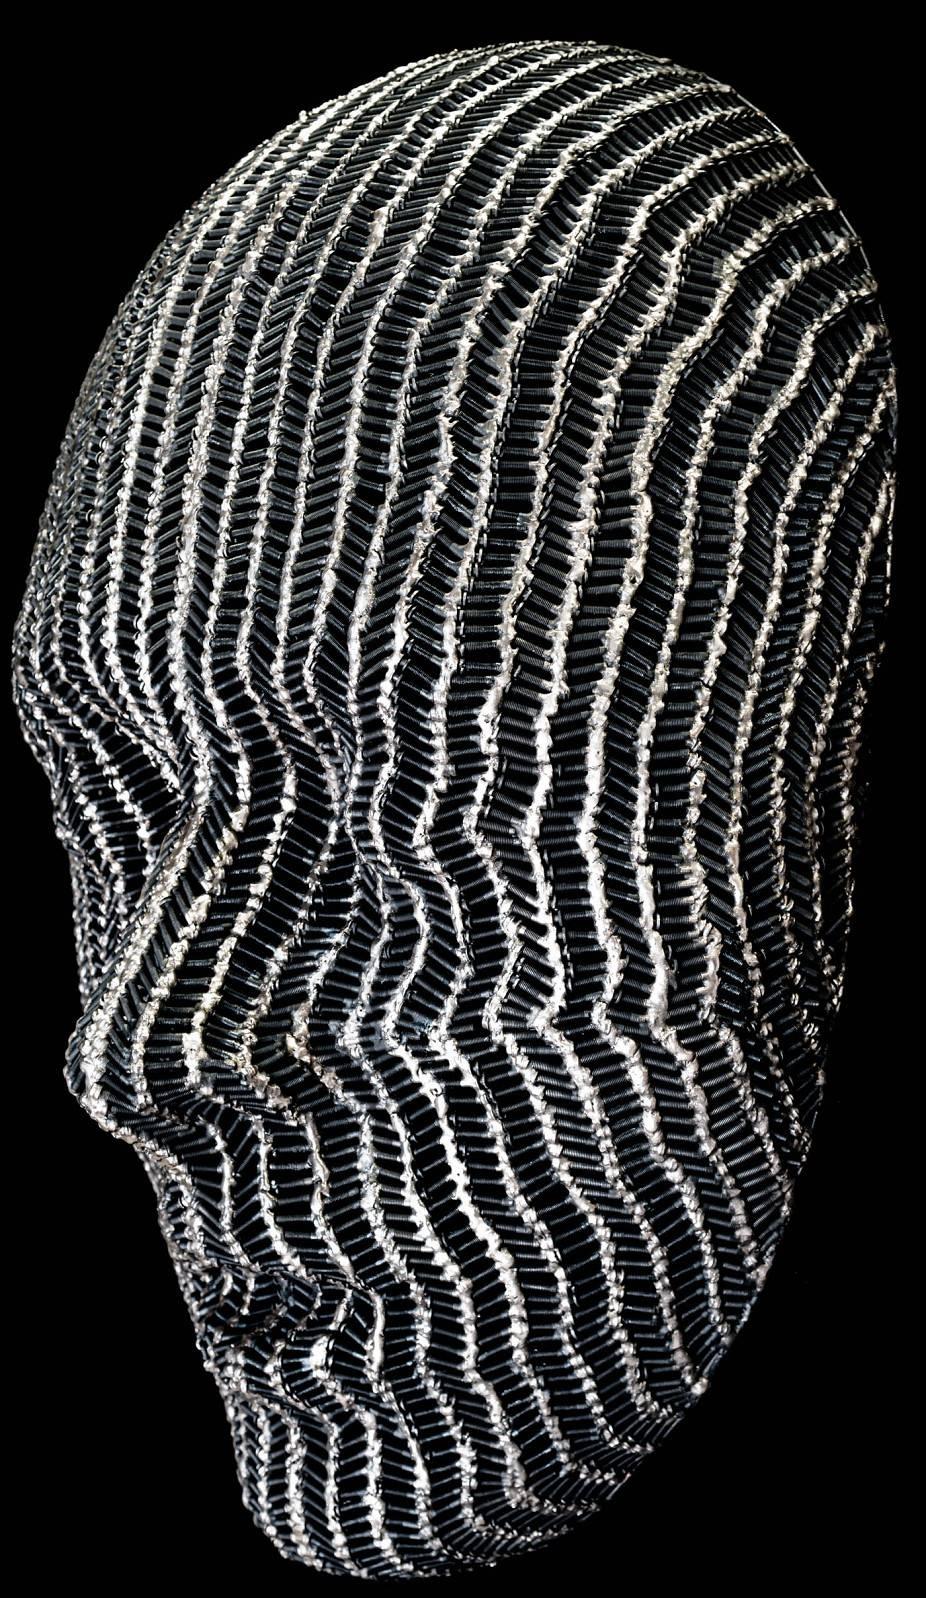 Hundreds of machine screws and bronze are skillfully shaped to create the folds and curves of a large mask. The silent face, its eyes closed, exudes a darkly romantic sensibility that recalls the mystery and aura of Gothic literature. This sculpture